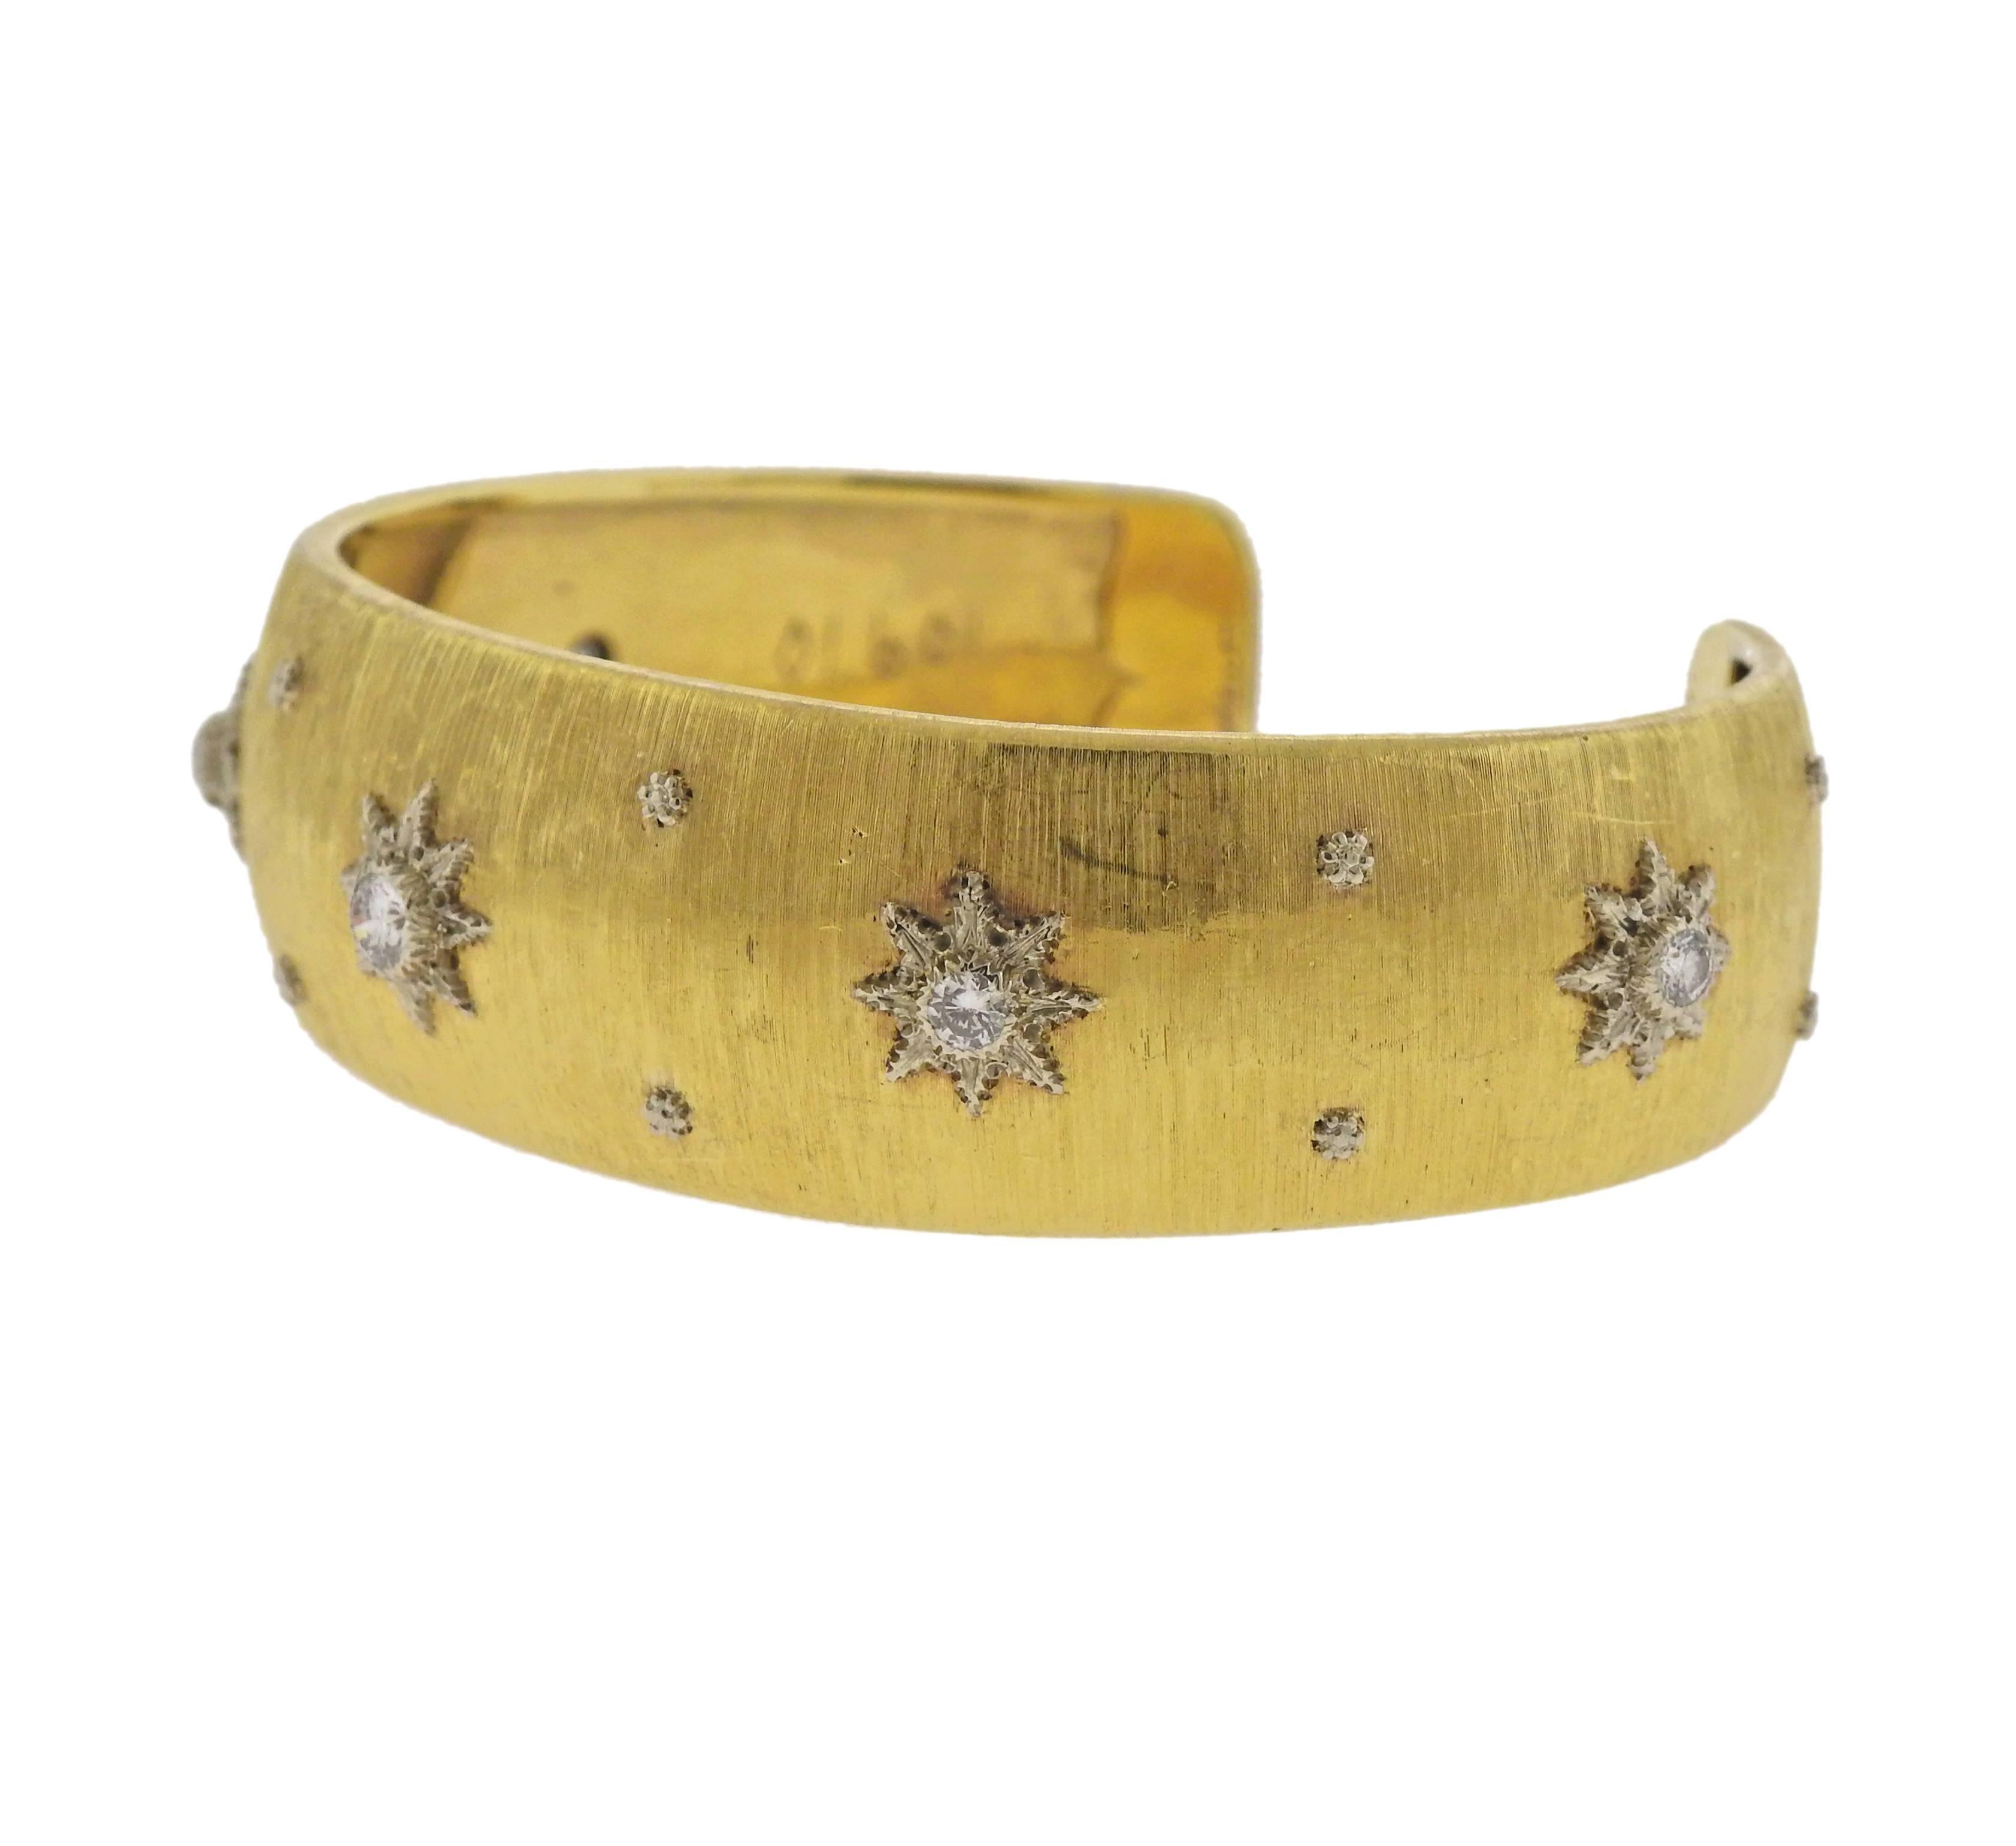 Classic 18k gold cuff bracelet by Buccellati, set with approx. 0.60ctw in diamonds. Bracelet will fit approx. 7